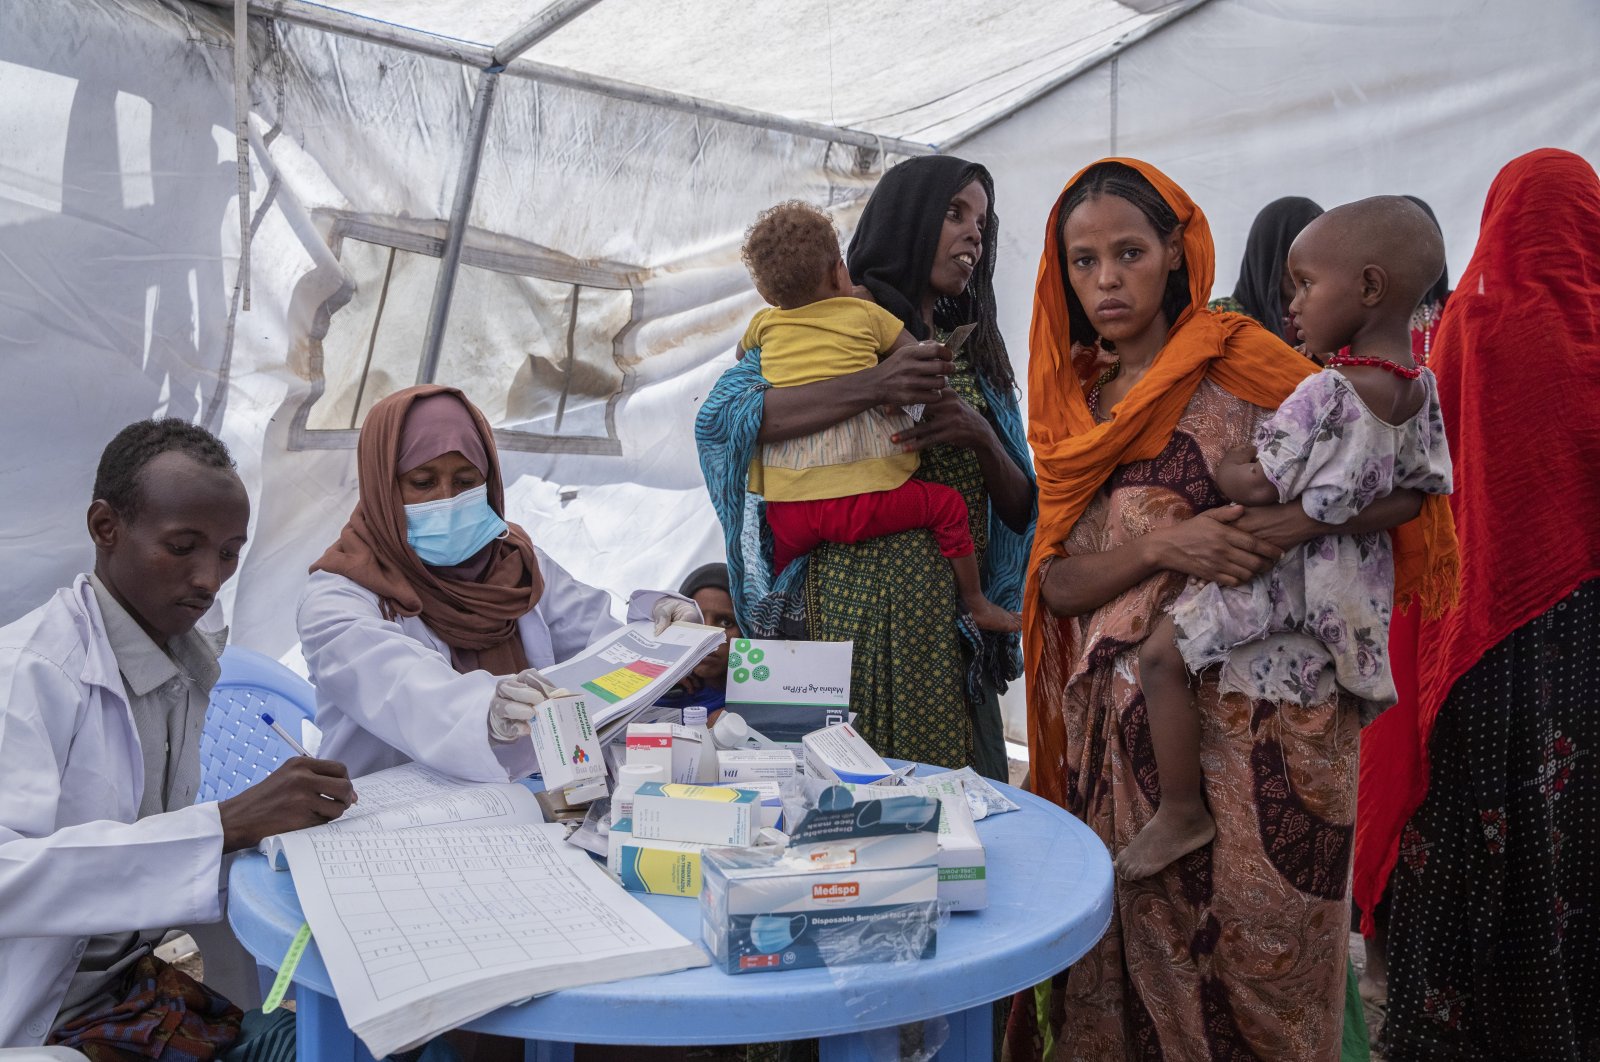 In this photo released by UNICEF, a mobile health and nutrition team attends to displaced mothers and their children at the Guyah site for internally displaced people in the Afar region of Ethiopia, May 10, 2022. (UNICEF via AP)